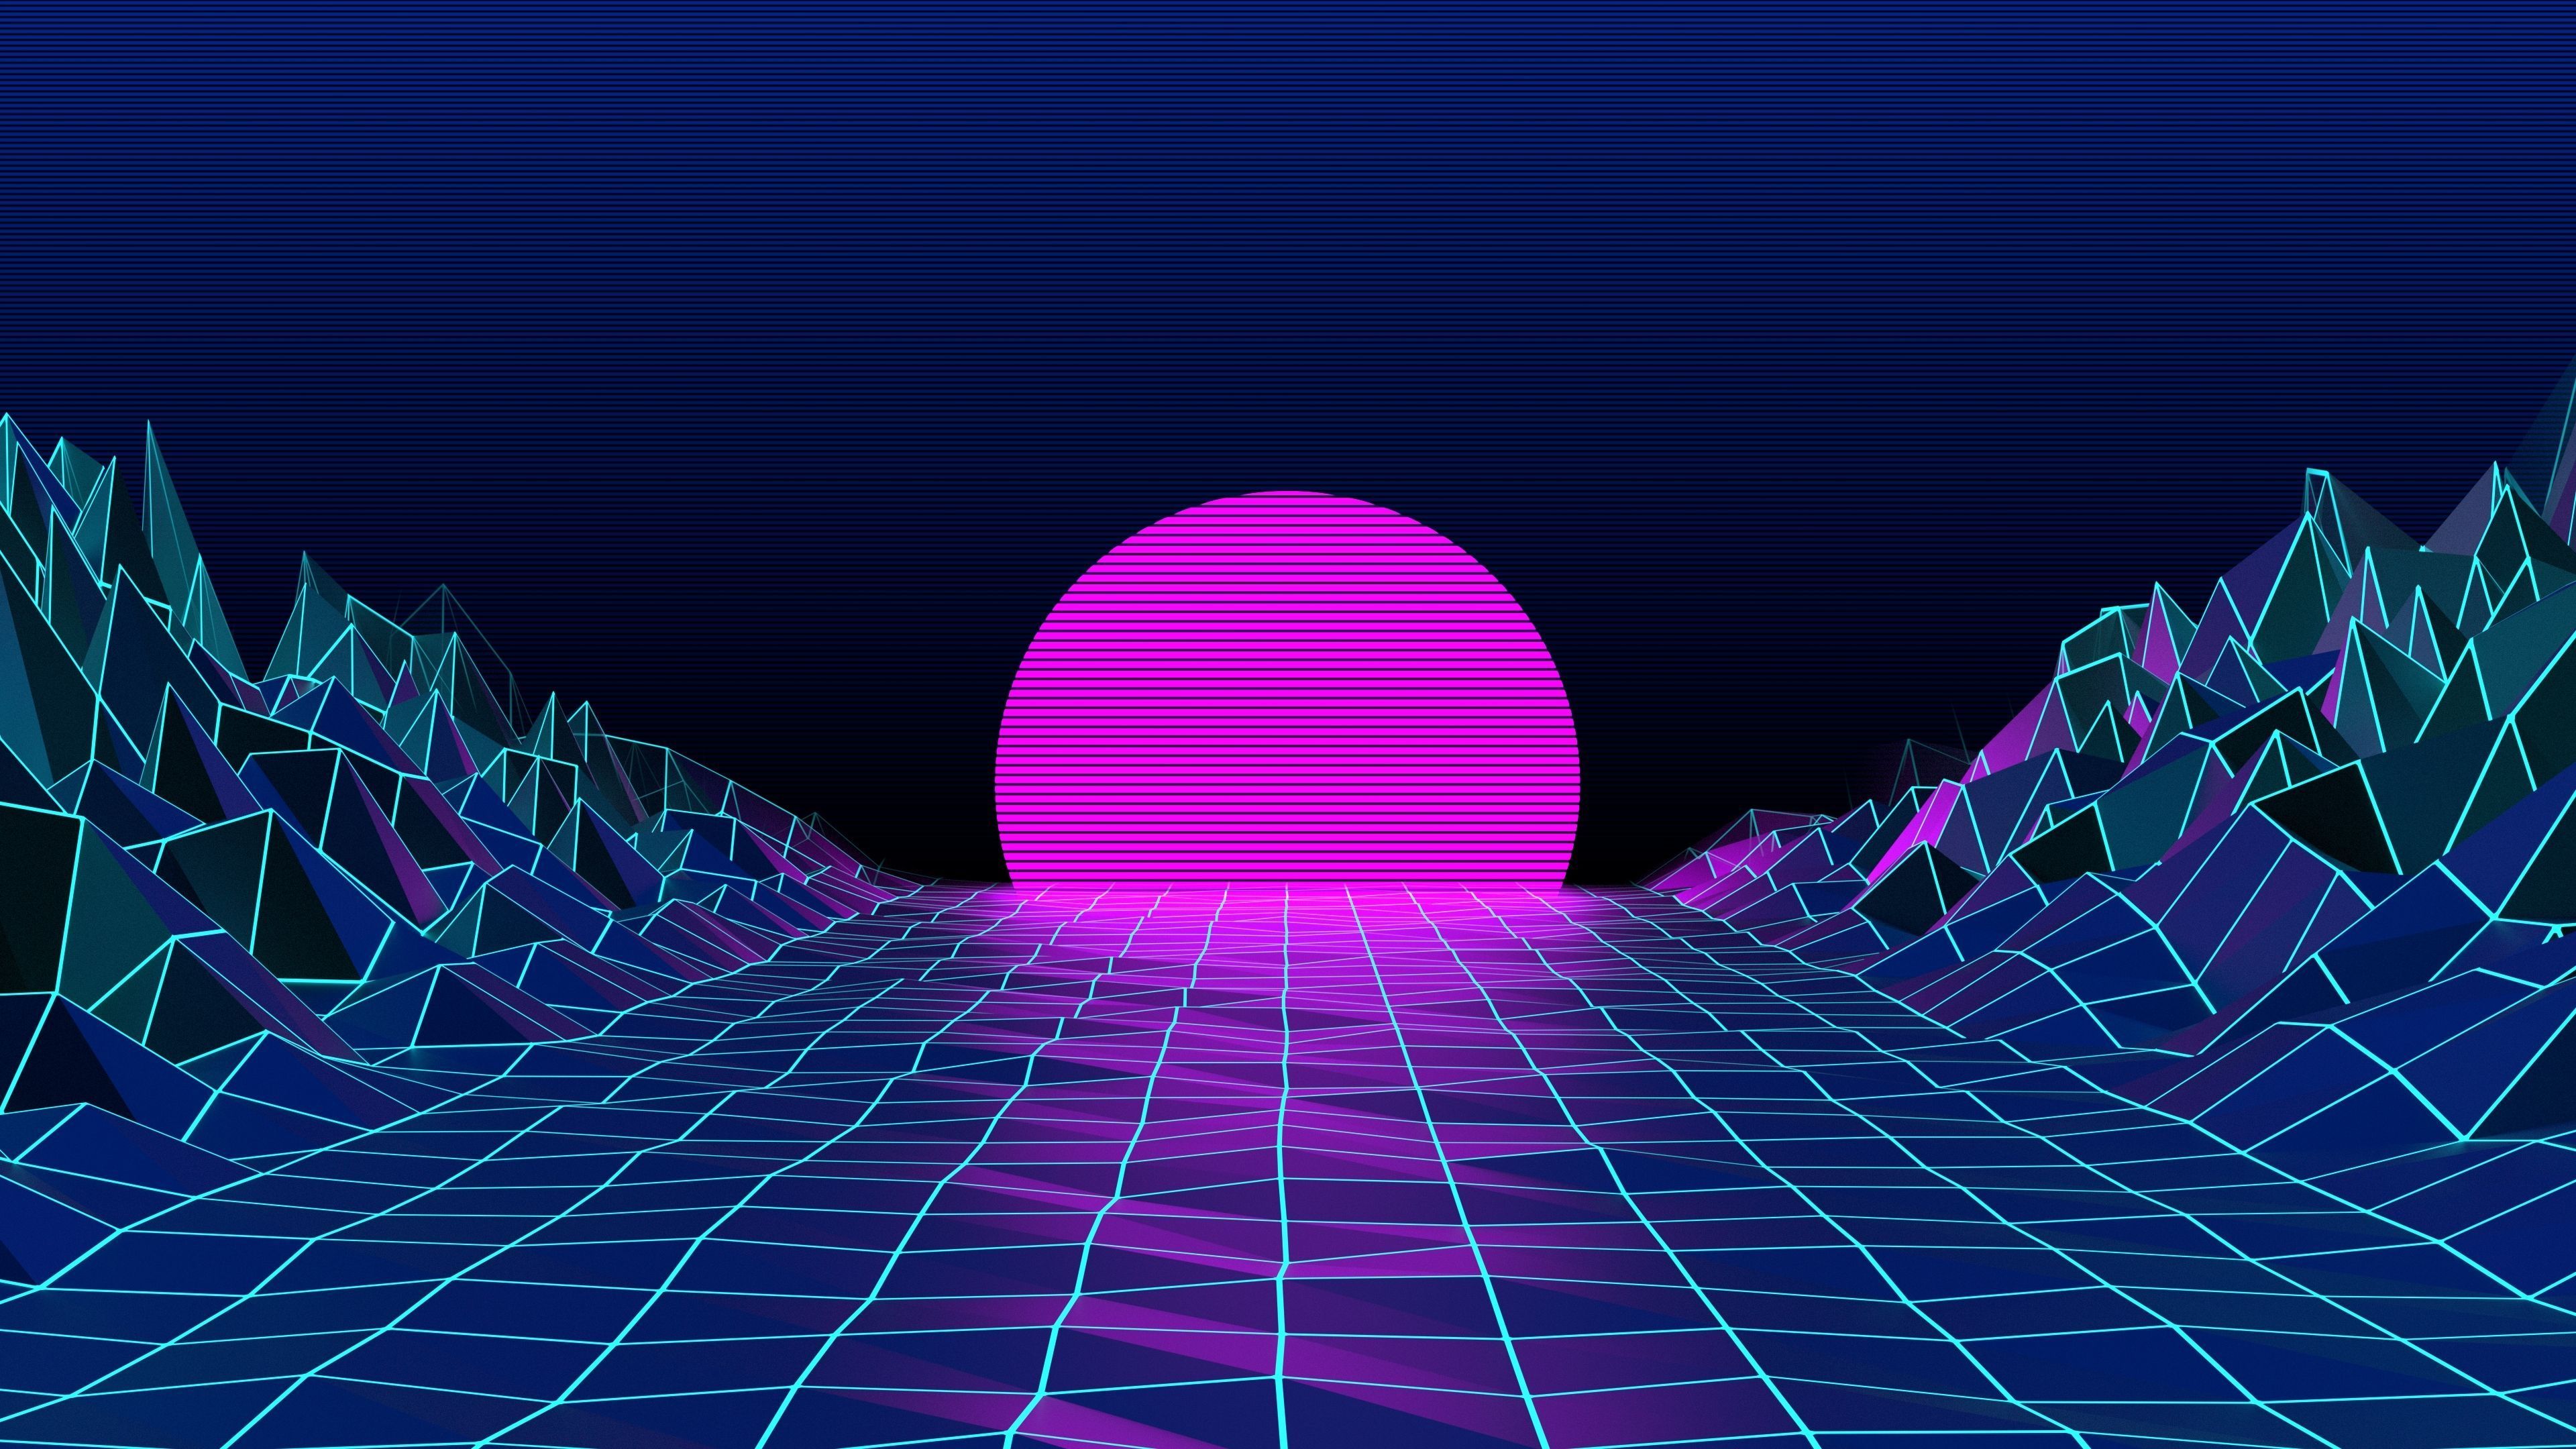 trippy aesthetic computer wallpapers wallpaper cave on trippy aesthetic desktop wallpapers